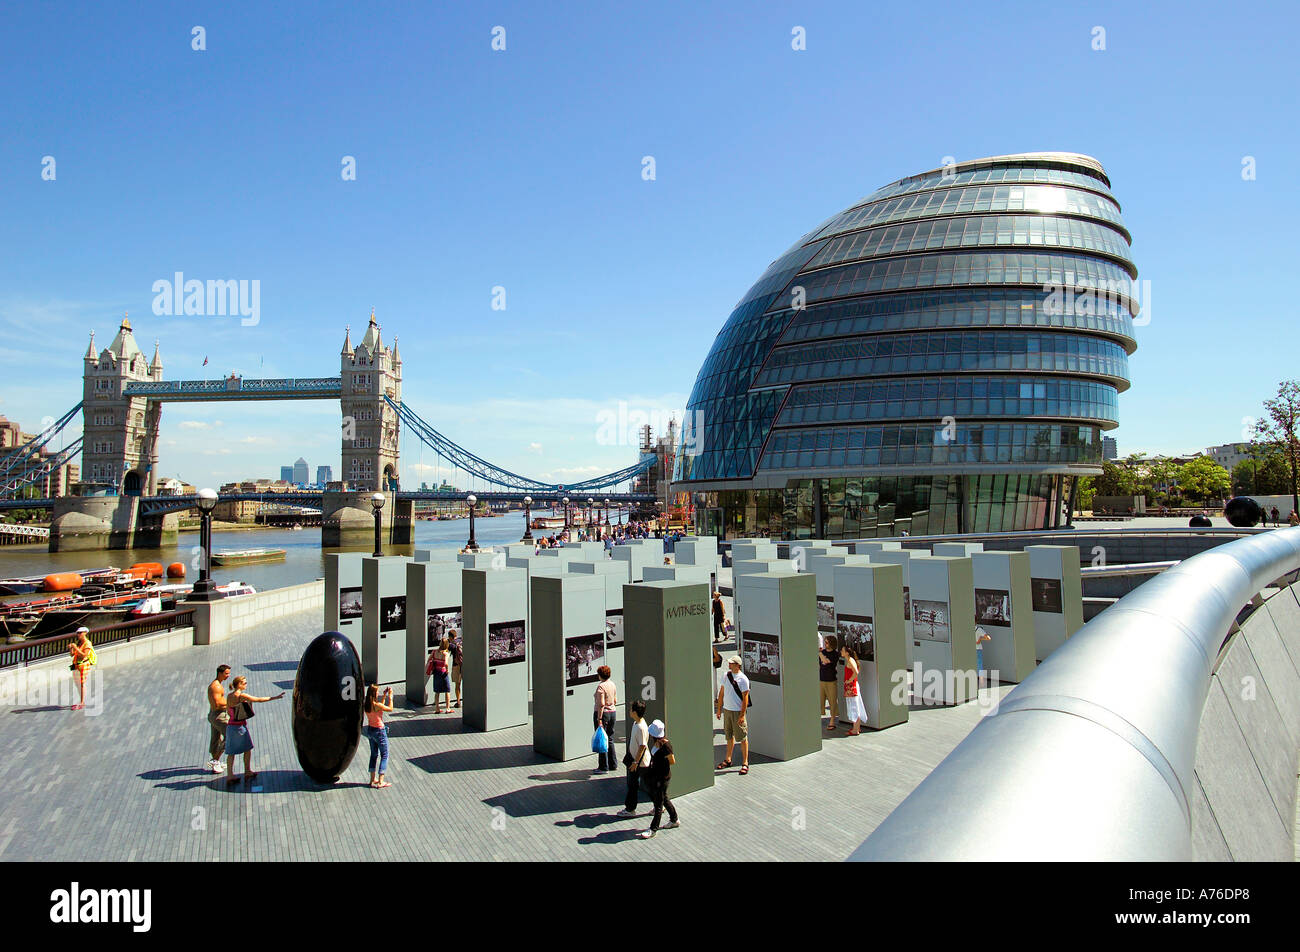 A wide angle view of the Thames with City Hall and Tower Bridge against a blue sky. Stock Photo